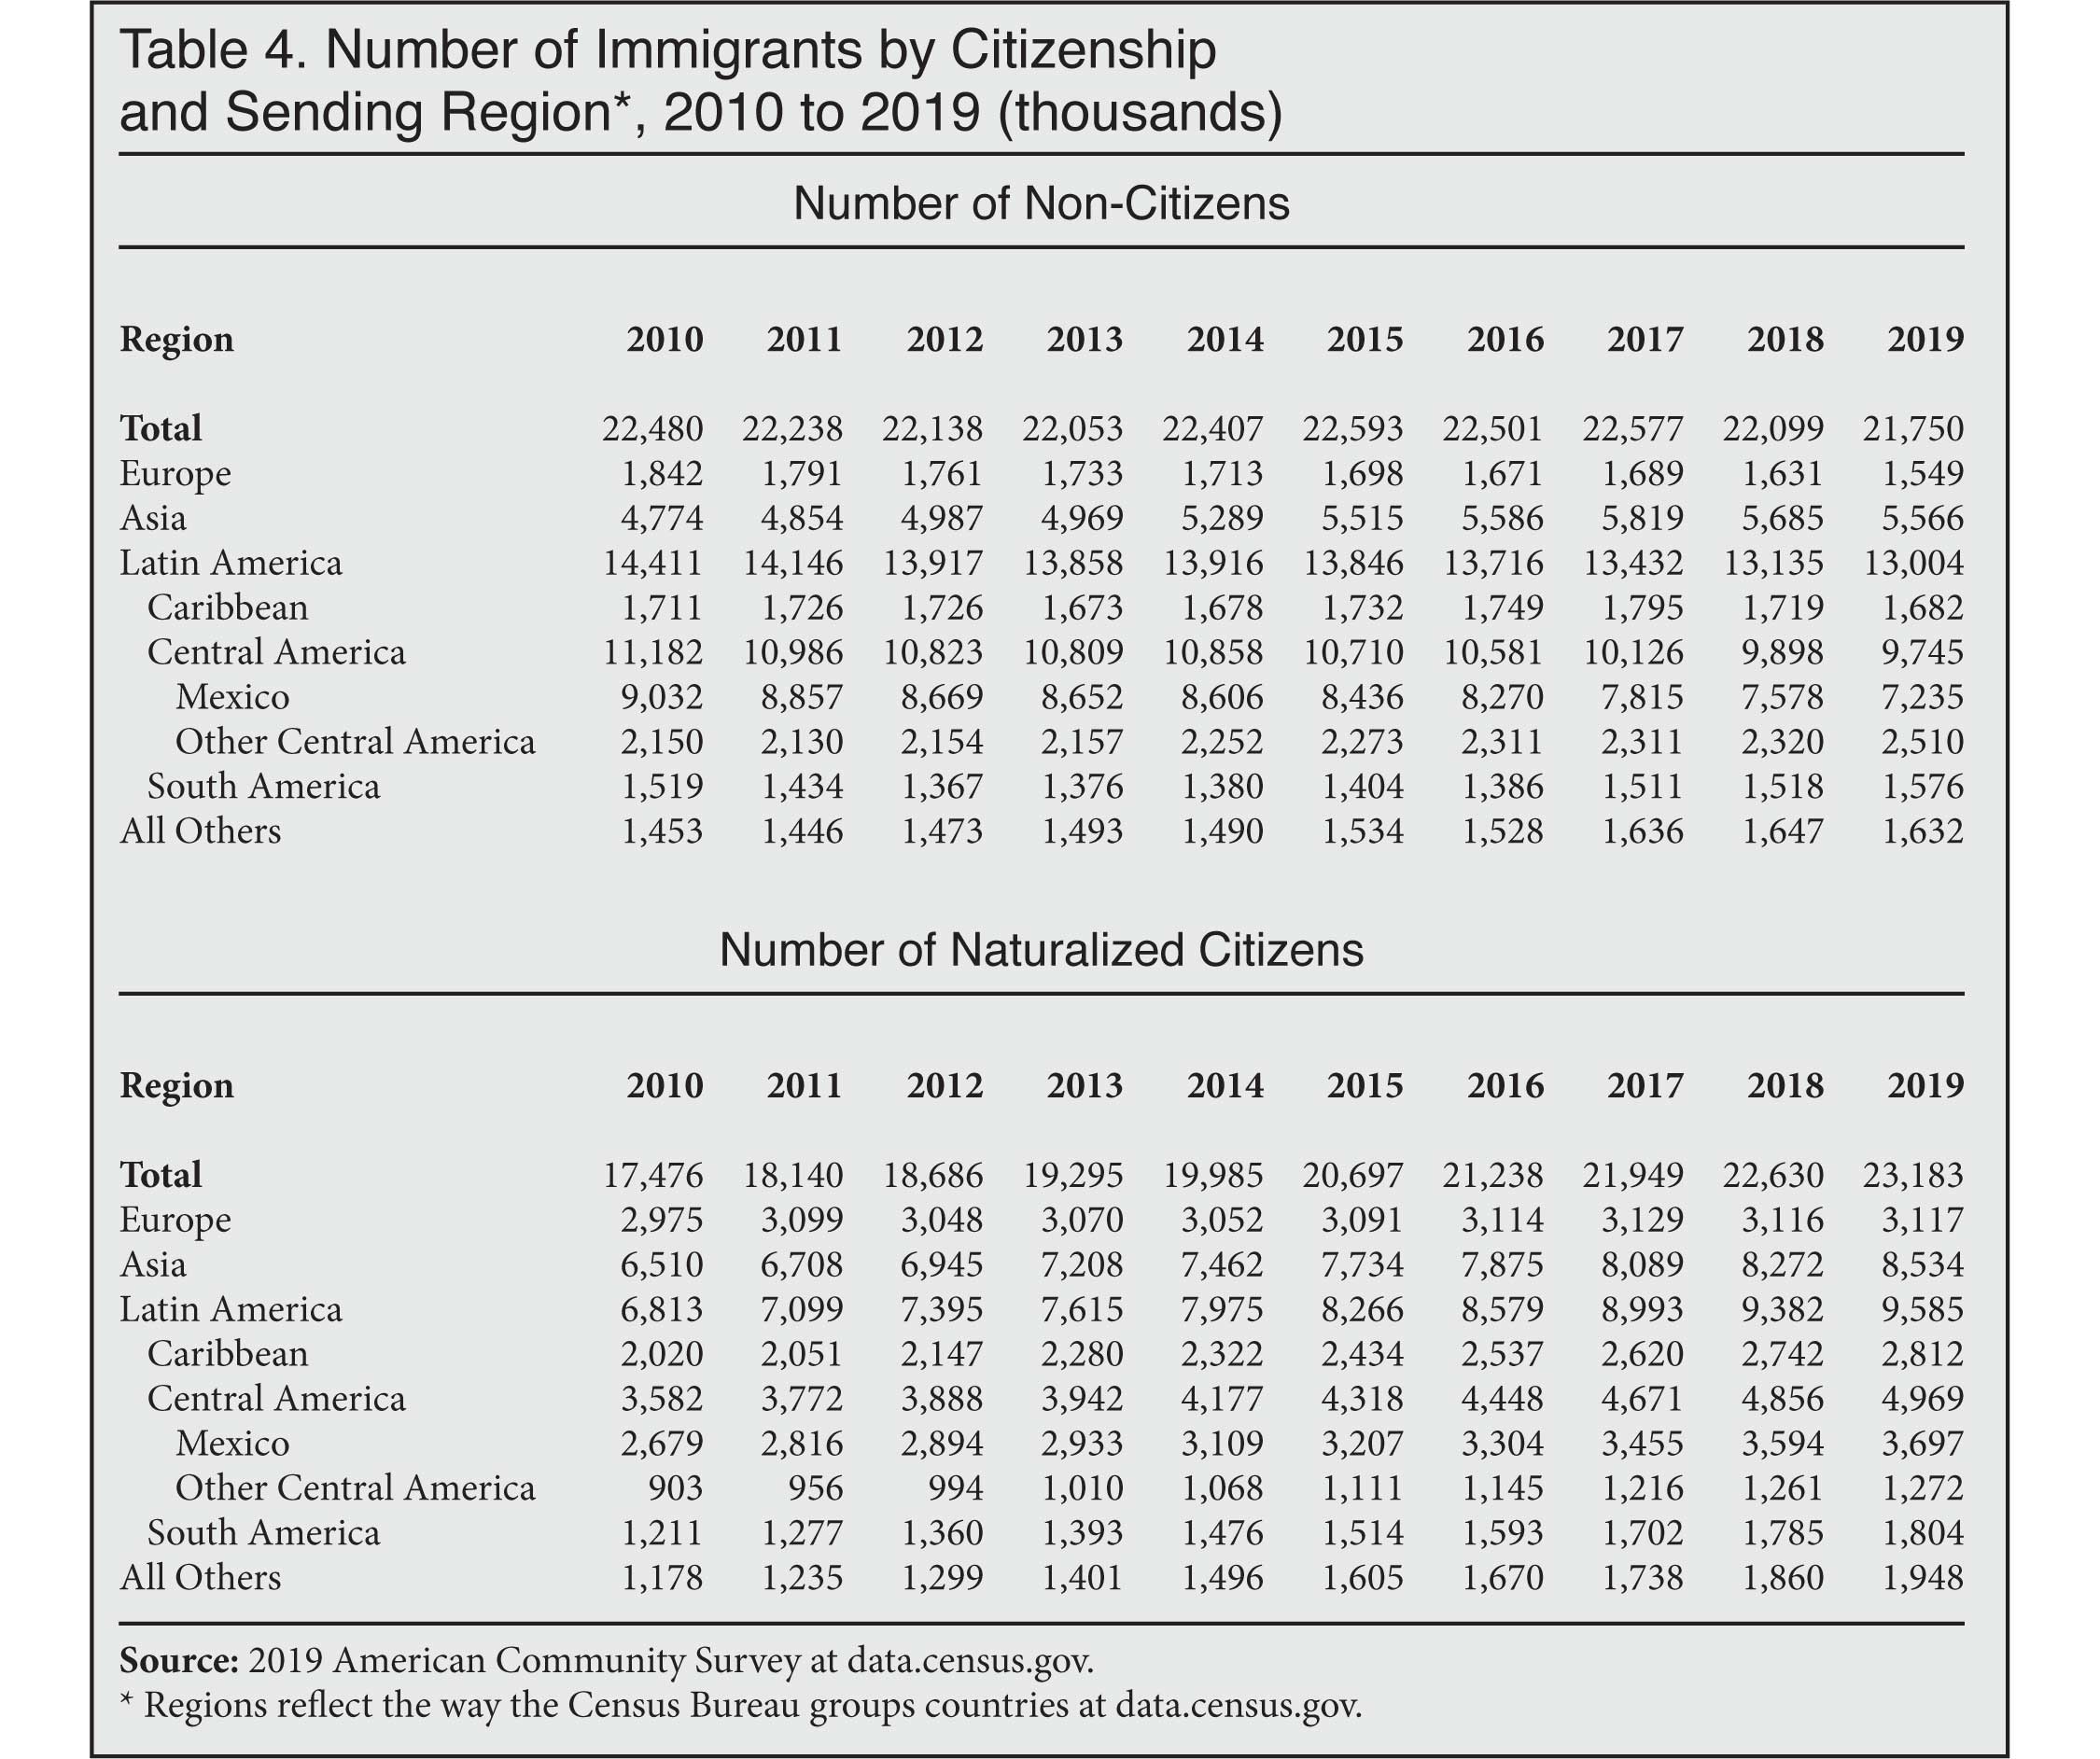 Table: Number of Immigrants by Citizenship and Sending Region, 2010 to 2019